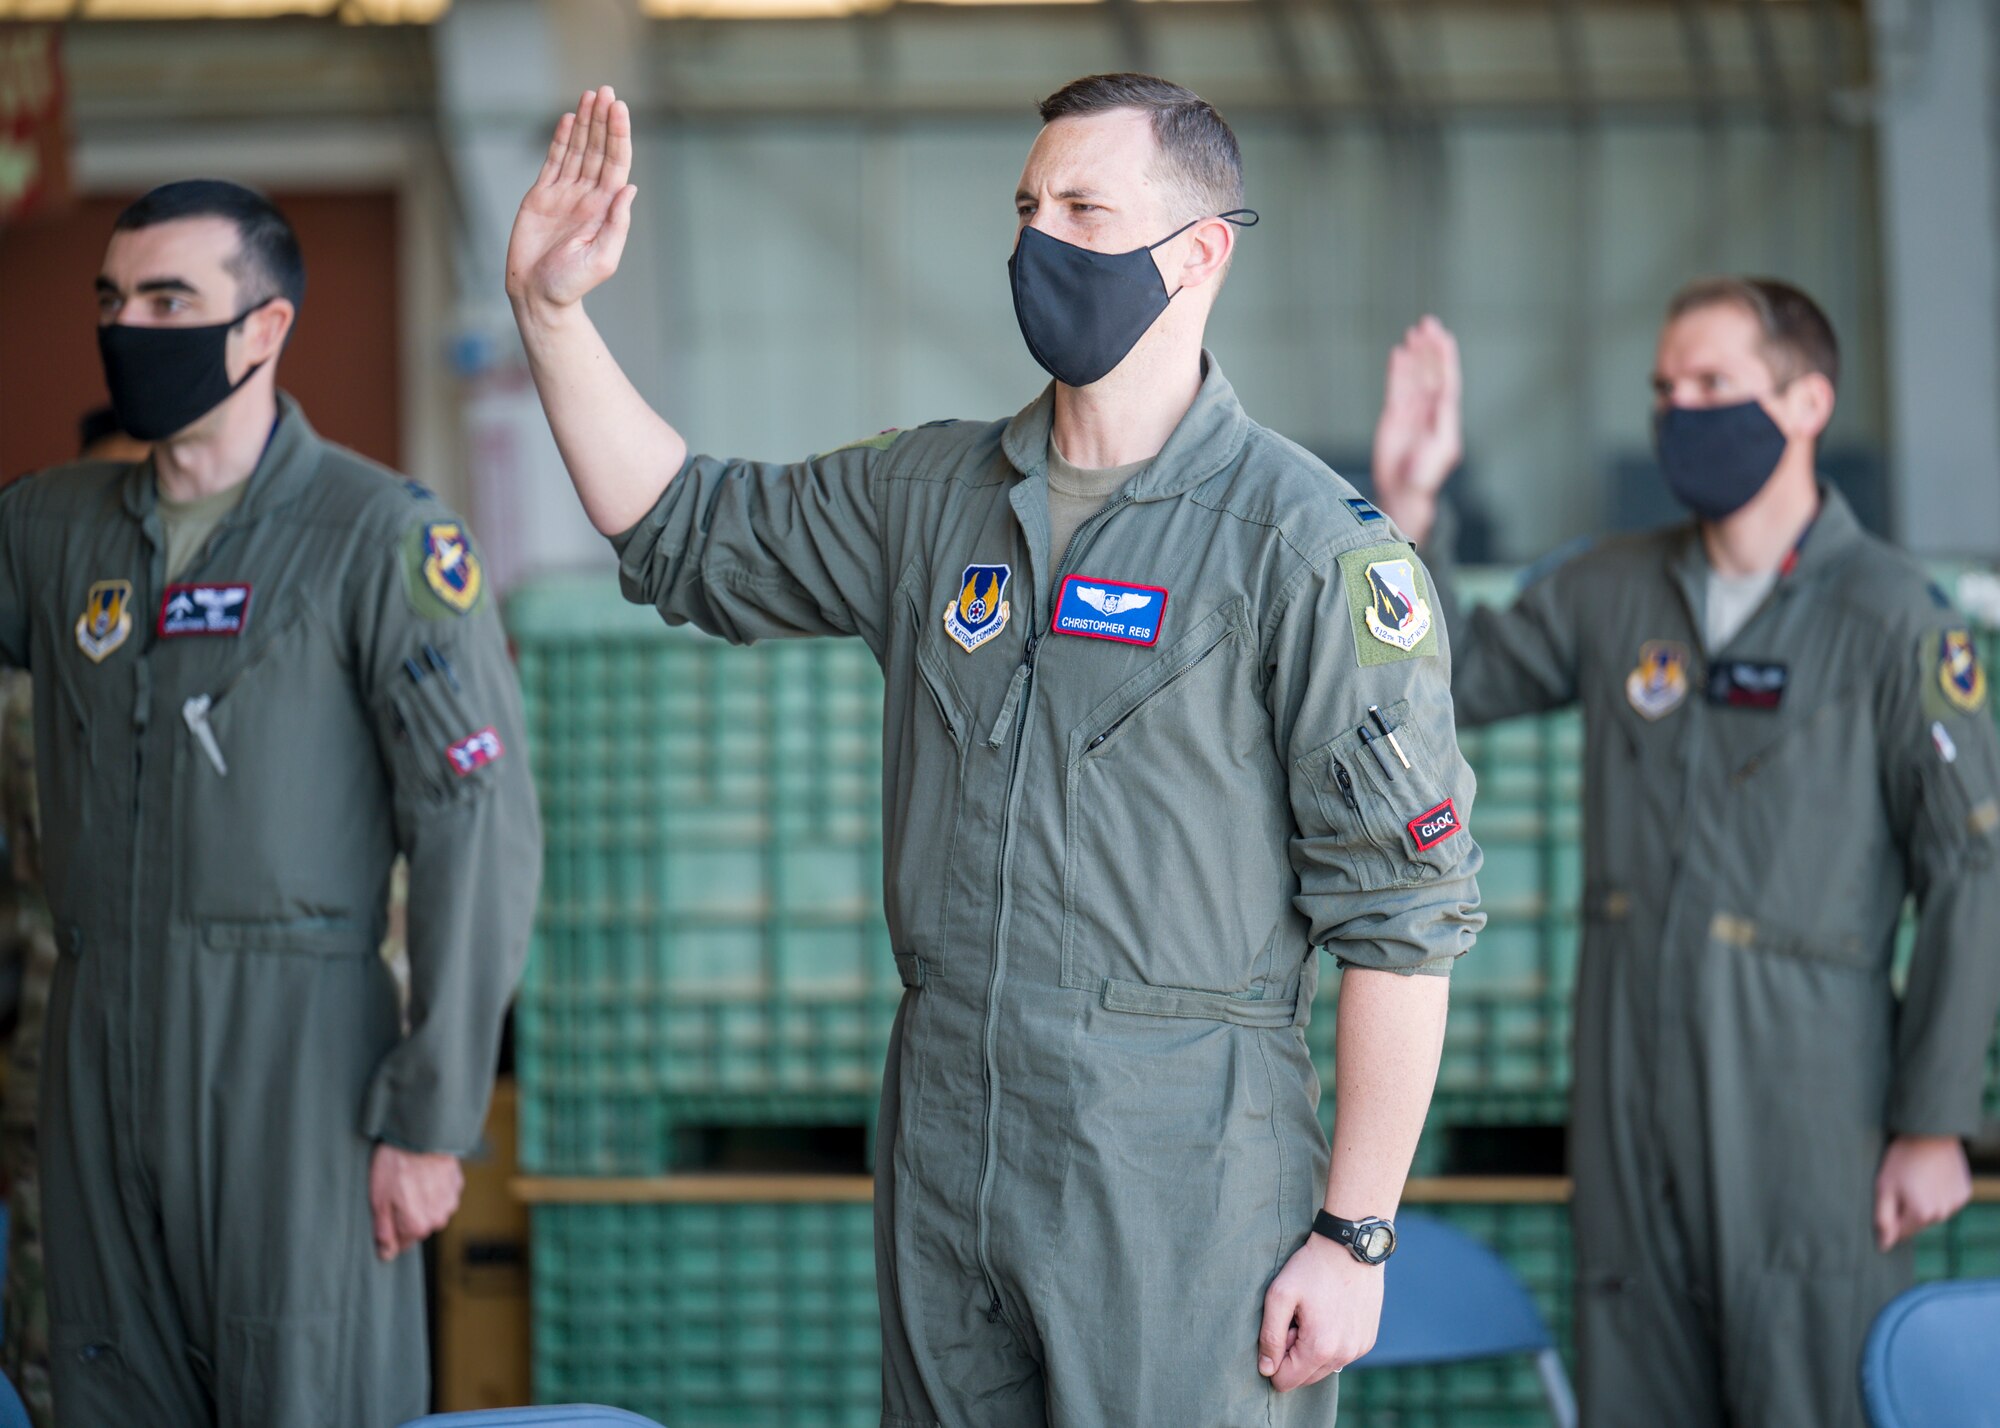 Capt. Christopher Reis, recites the oath of office during a Space Force Transfer Ceremony at Edwards Air Force Base, California, Feb. 11. (Air Force photo by Giancarlo Casem)